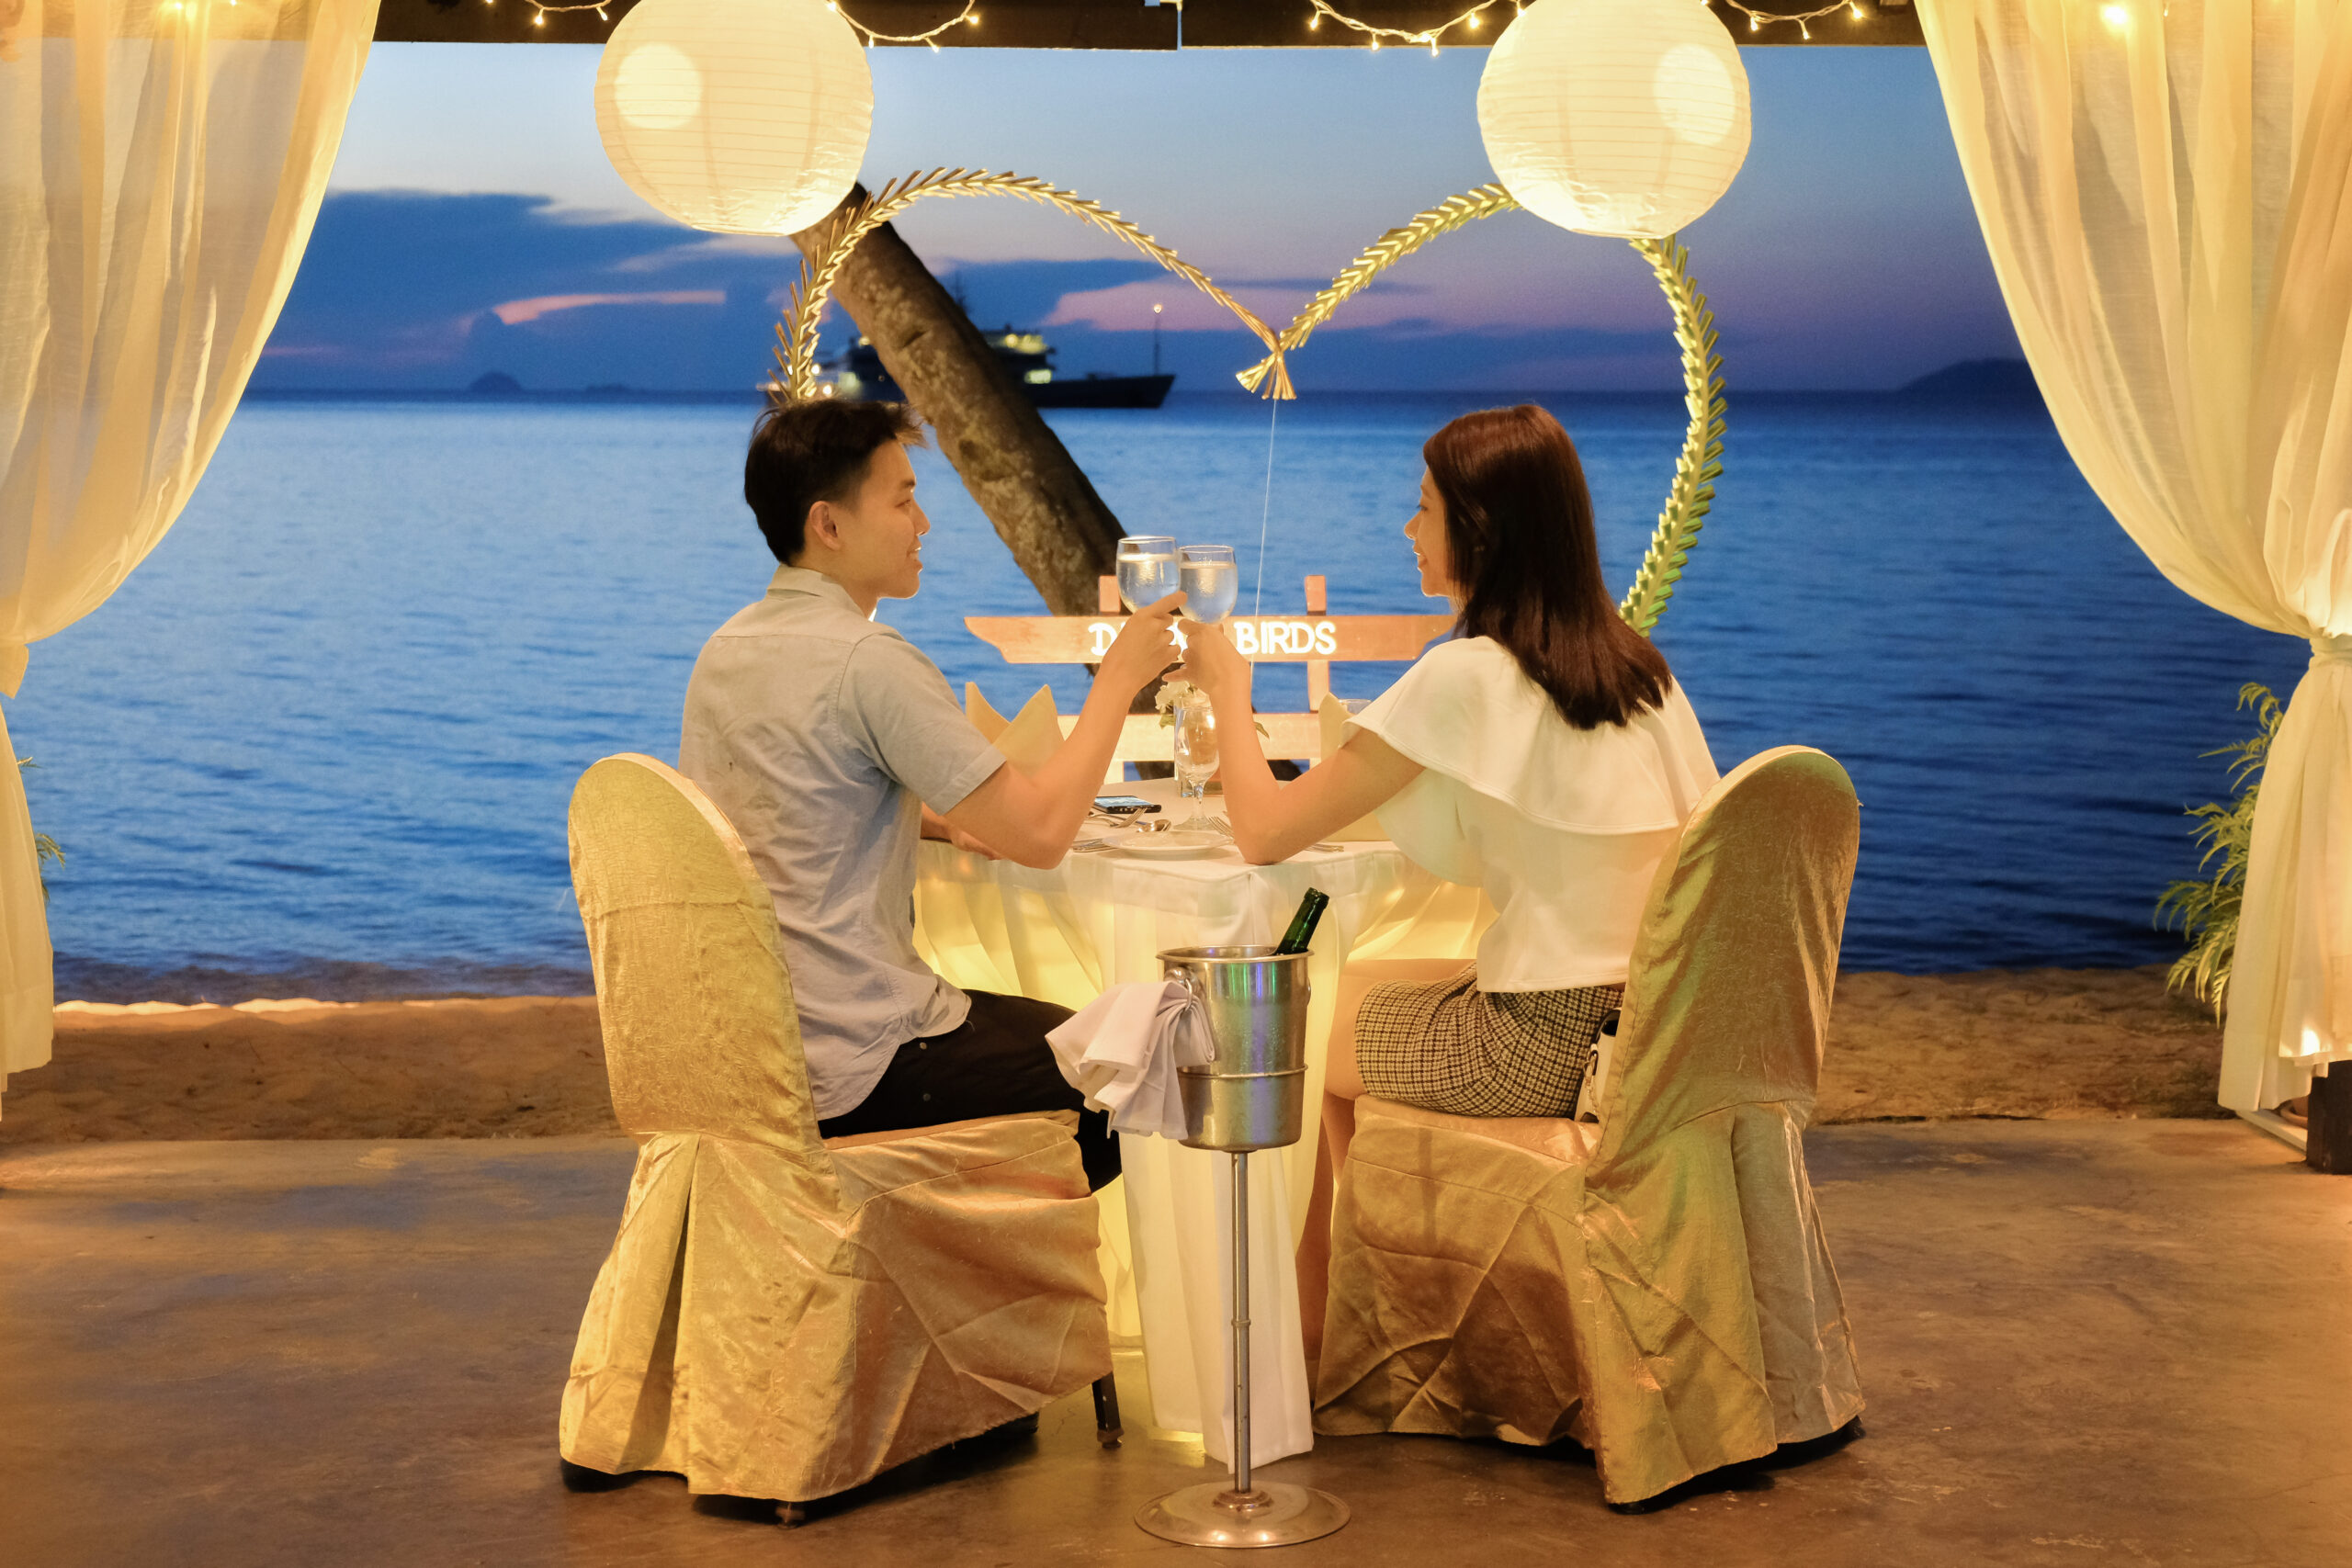 Young couple enjoying a romantic dinner by candlelight, outdoor in maldives. Enjoy maldives vacation with Halo flights USA.